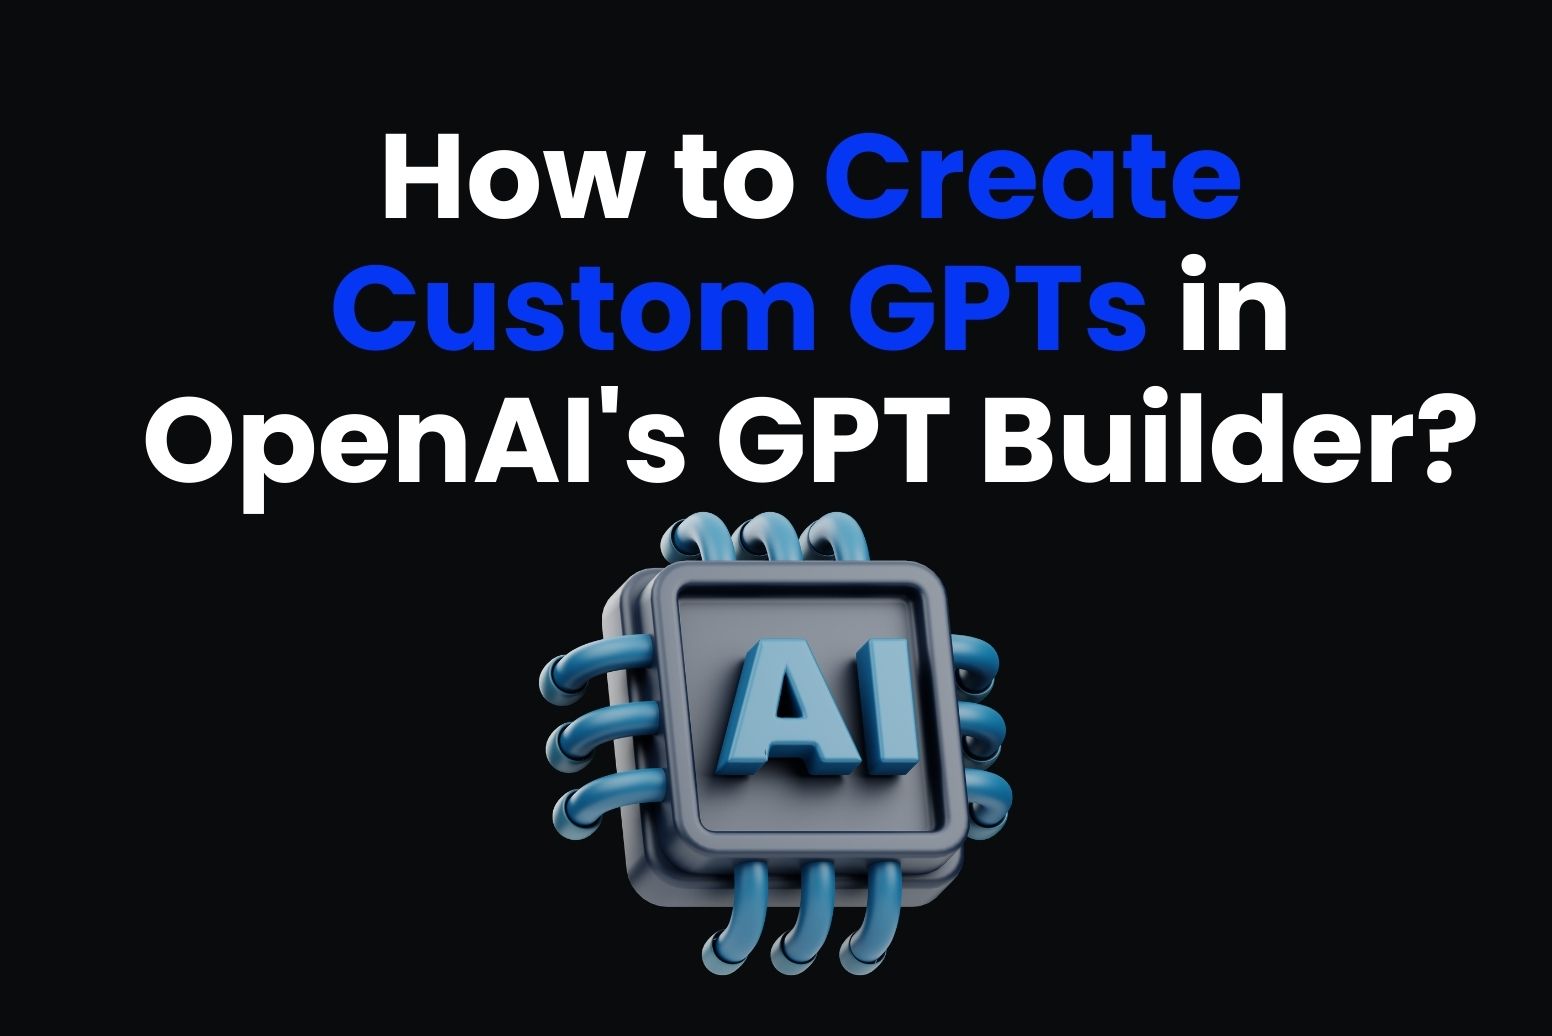 How to Create Custom GPTs in OpenAI's GPT Builder